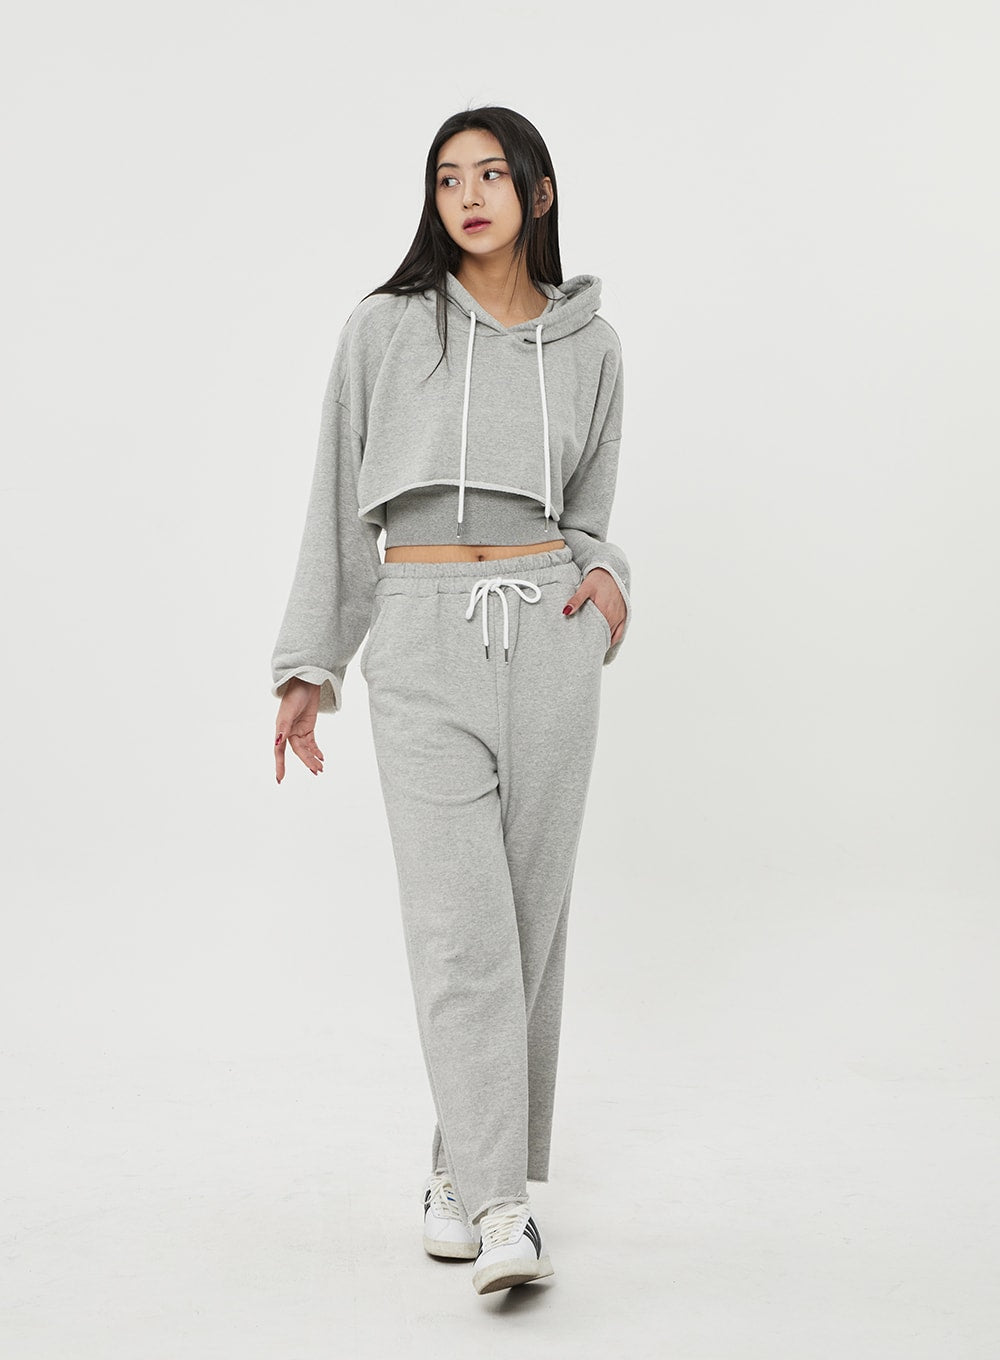 sweatsuits-sets-3-piece-outfit-bf317